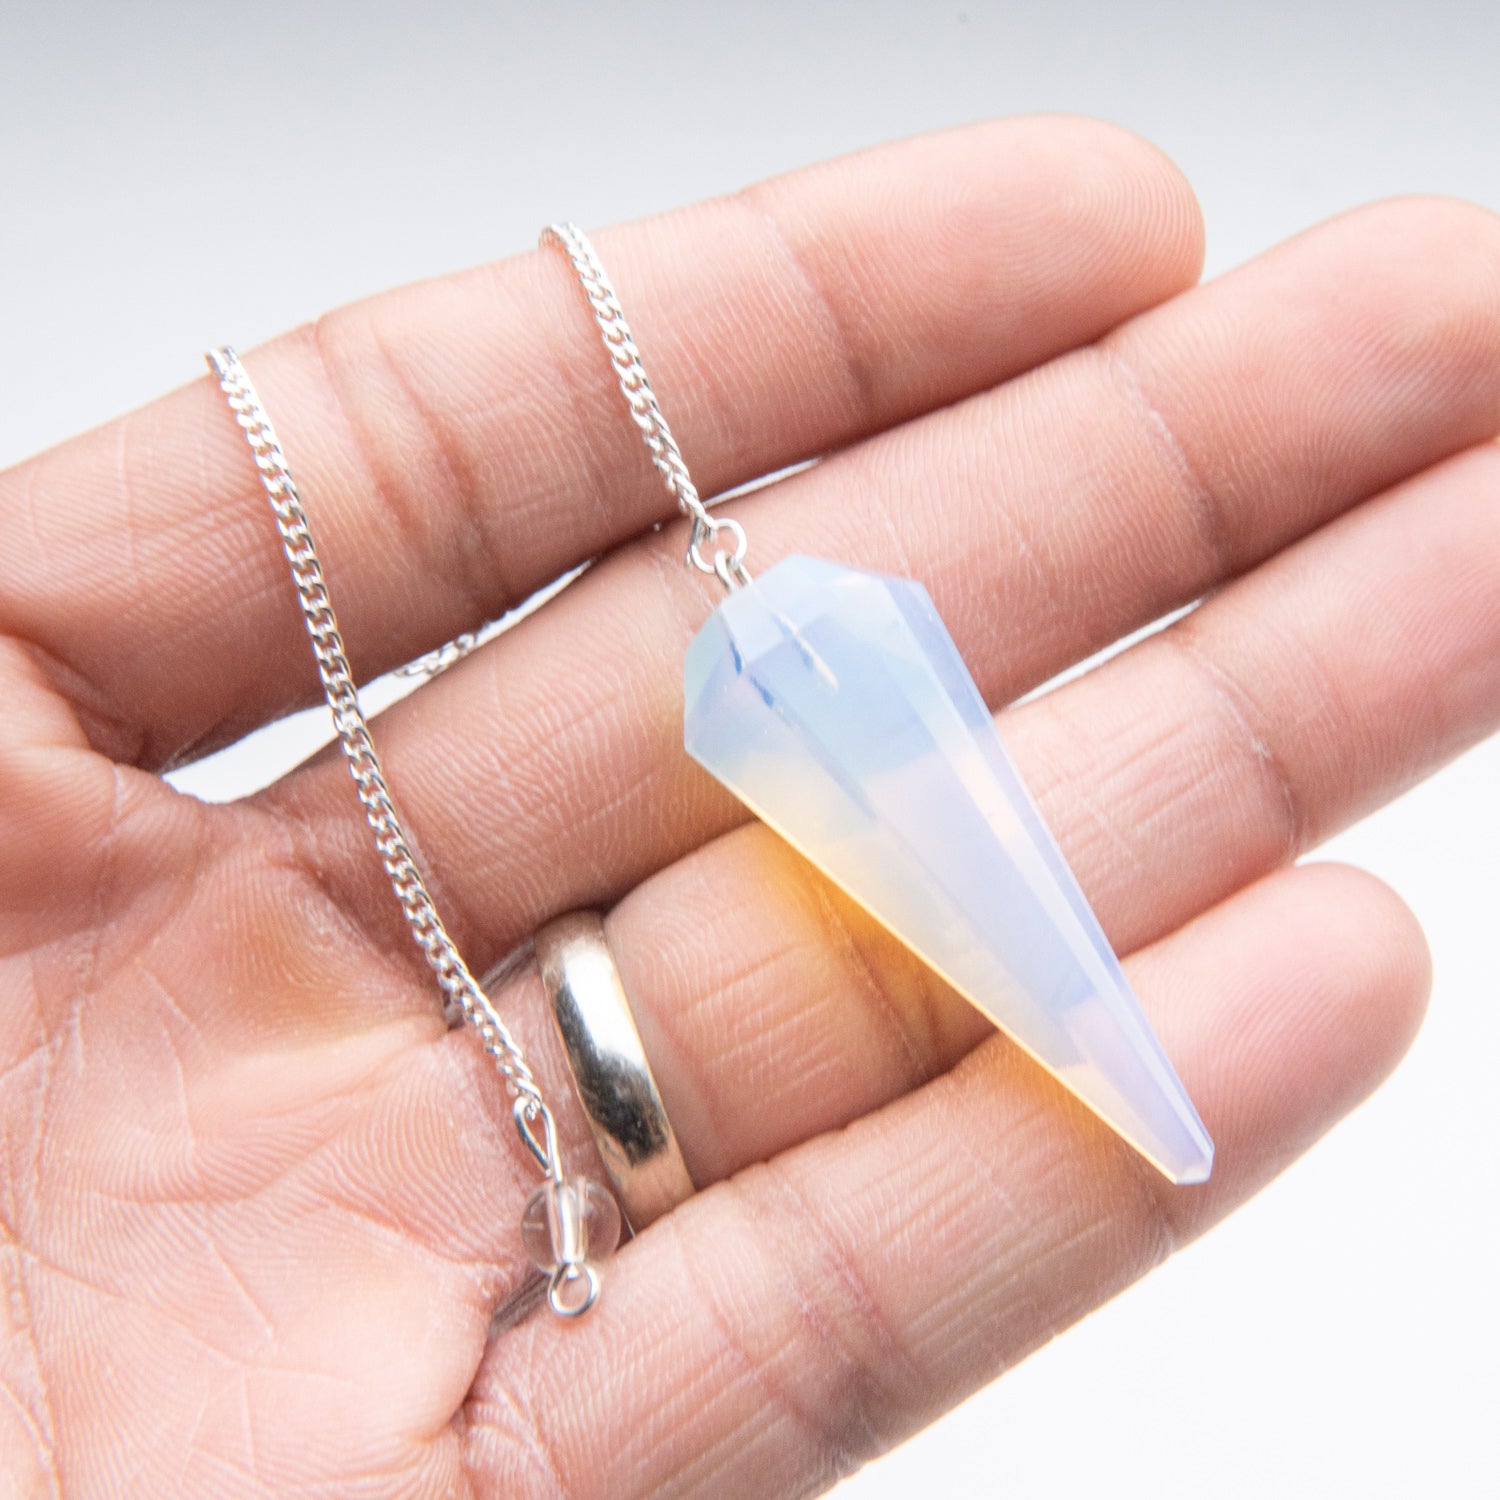 Genuine Polished Opalite Pendulum (with Chain) with black velvet pouch